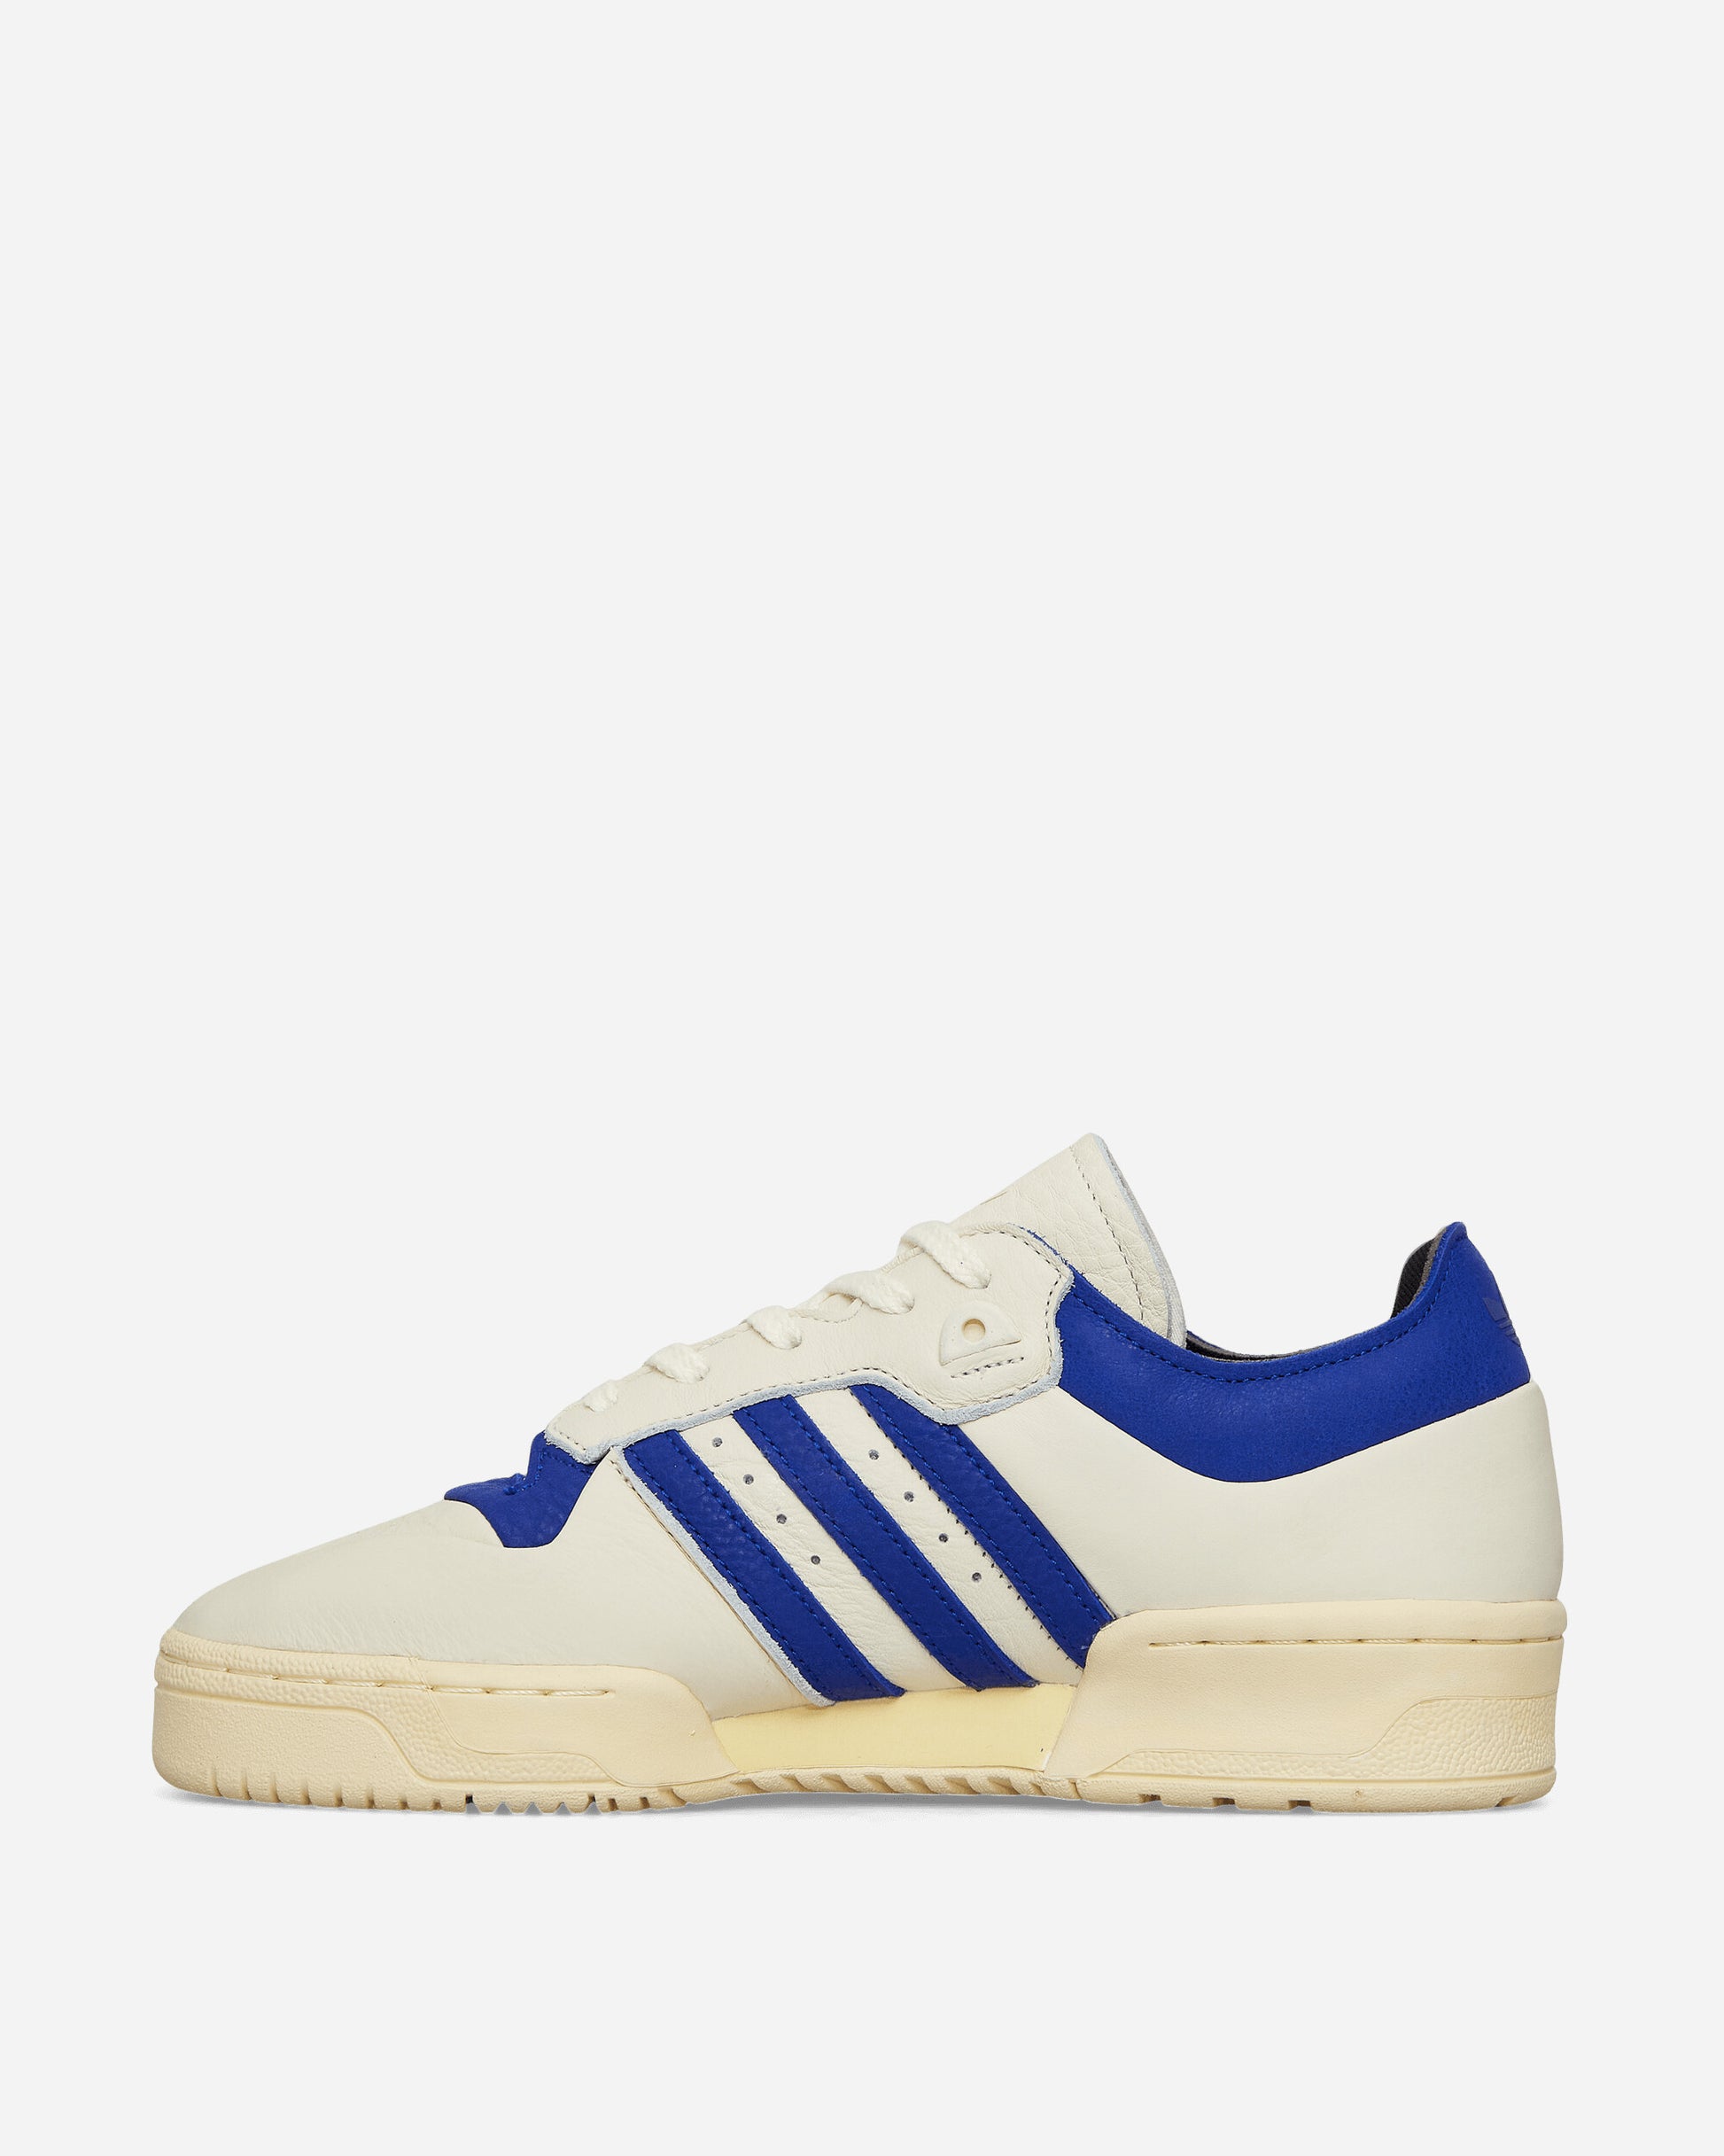 adidas Rivalry 86 Low 002 Cream White/Lucid Blue Sneakers Low IF4437 001